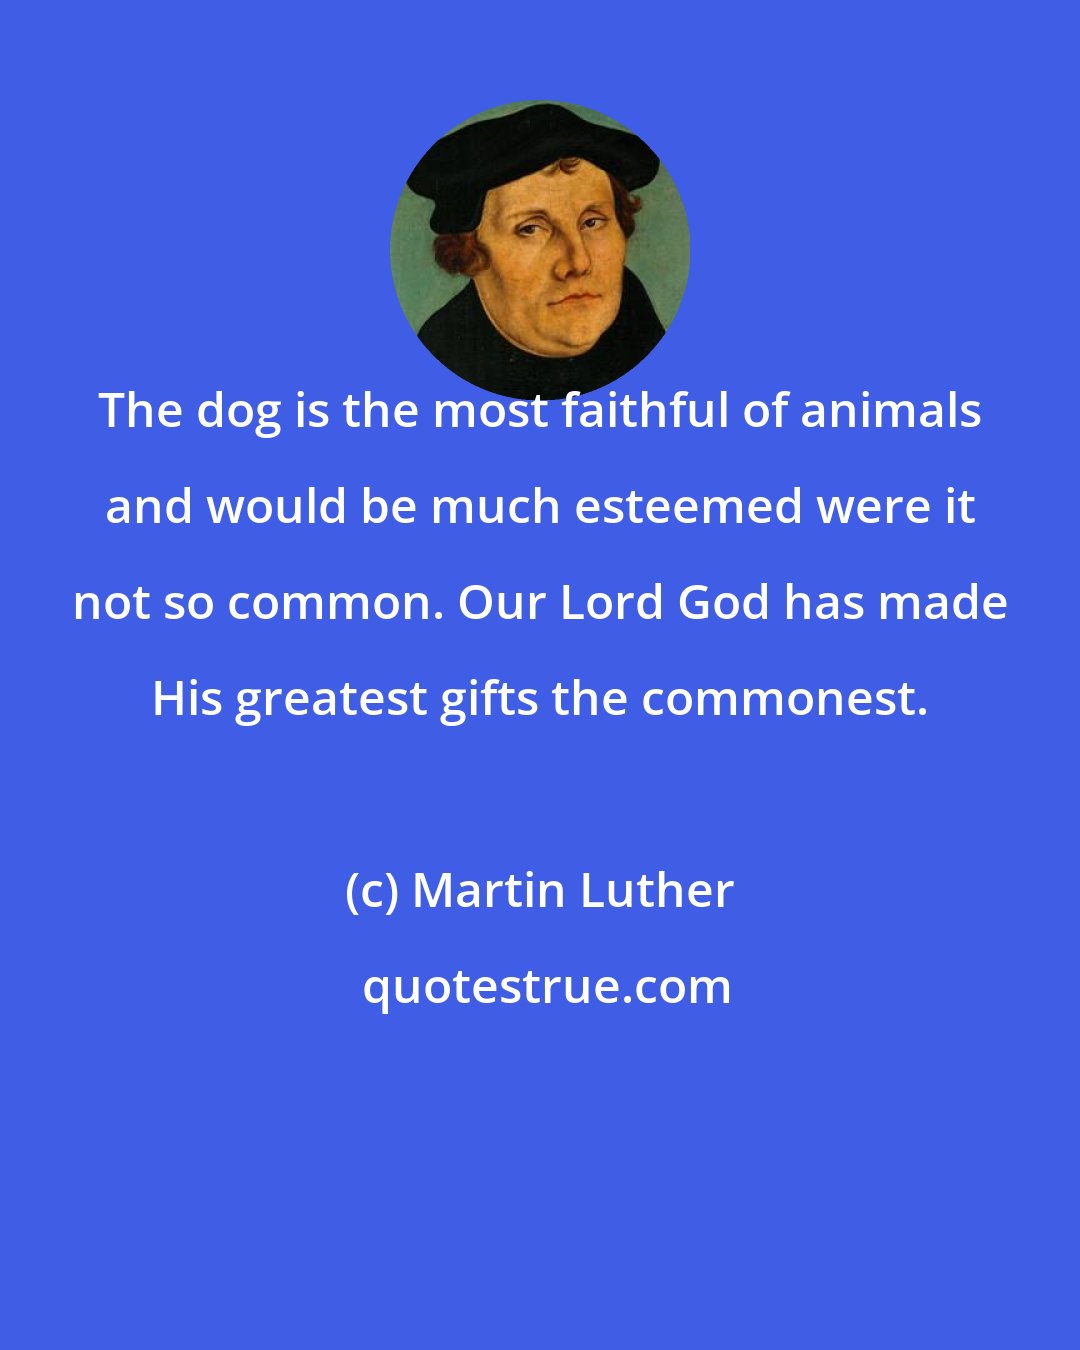 Martin Luther: The dog is the most faithful of animals and would be much esteemed were it not so common. Our Lord God has made His greatest gifts the commonest.